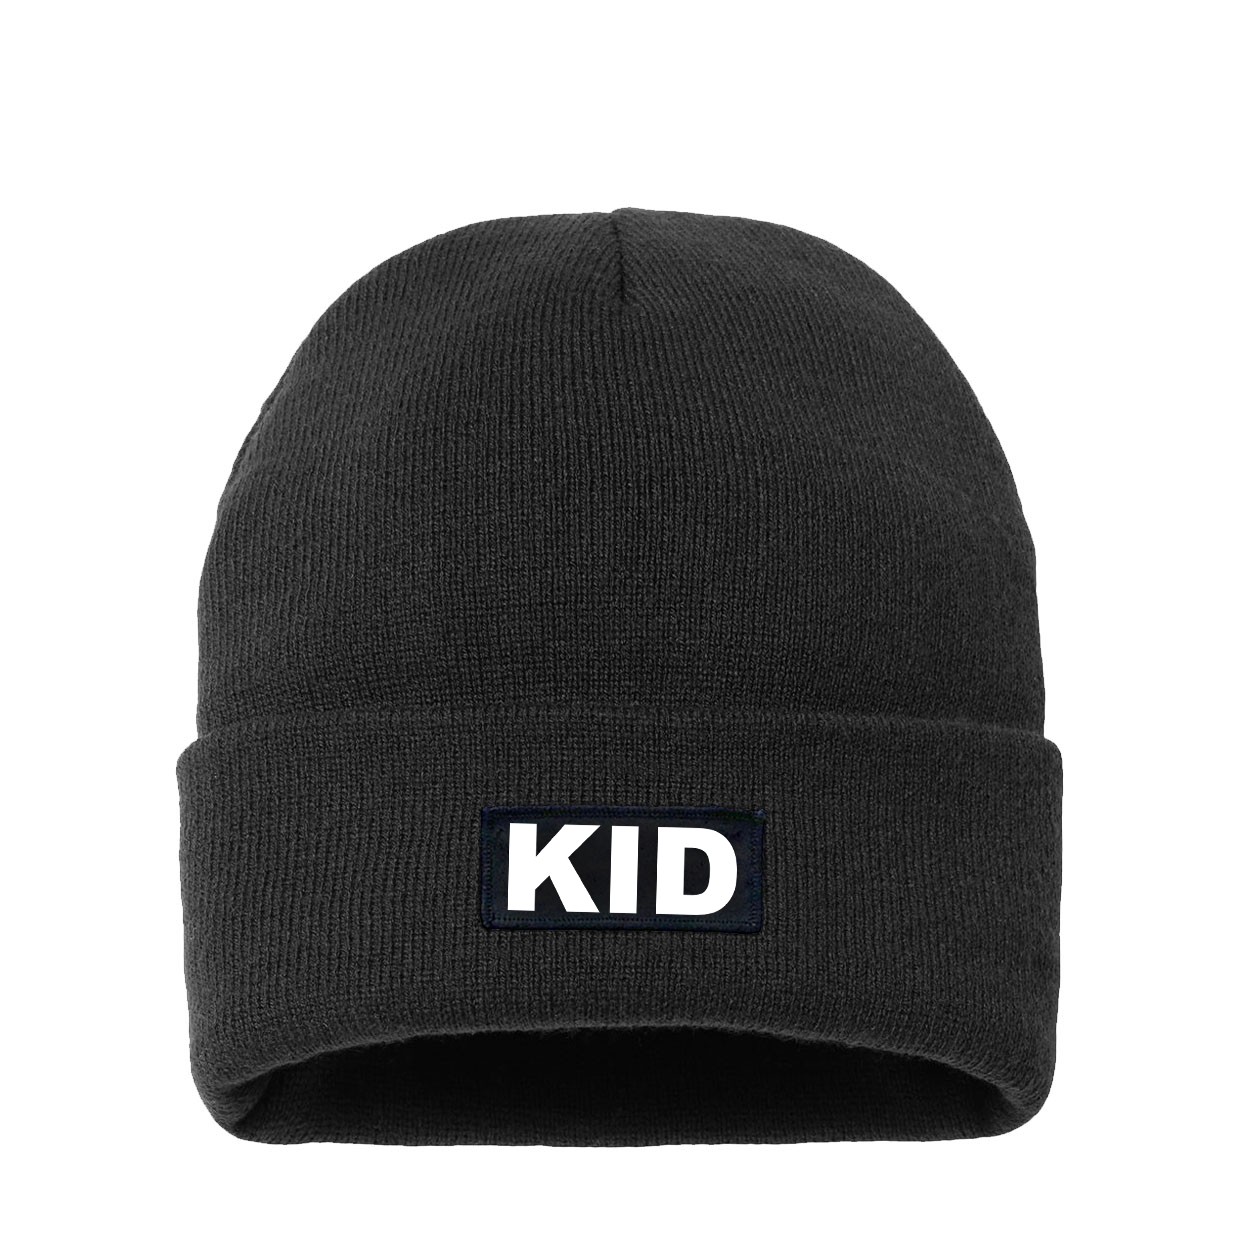 Kid Brand Logo Night Out Woven Patch Night Out Sherpa Lined Cuffed Beanie Black